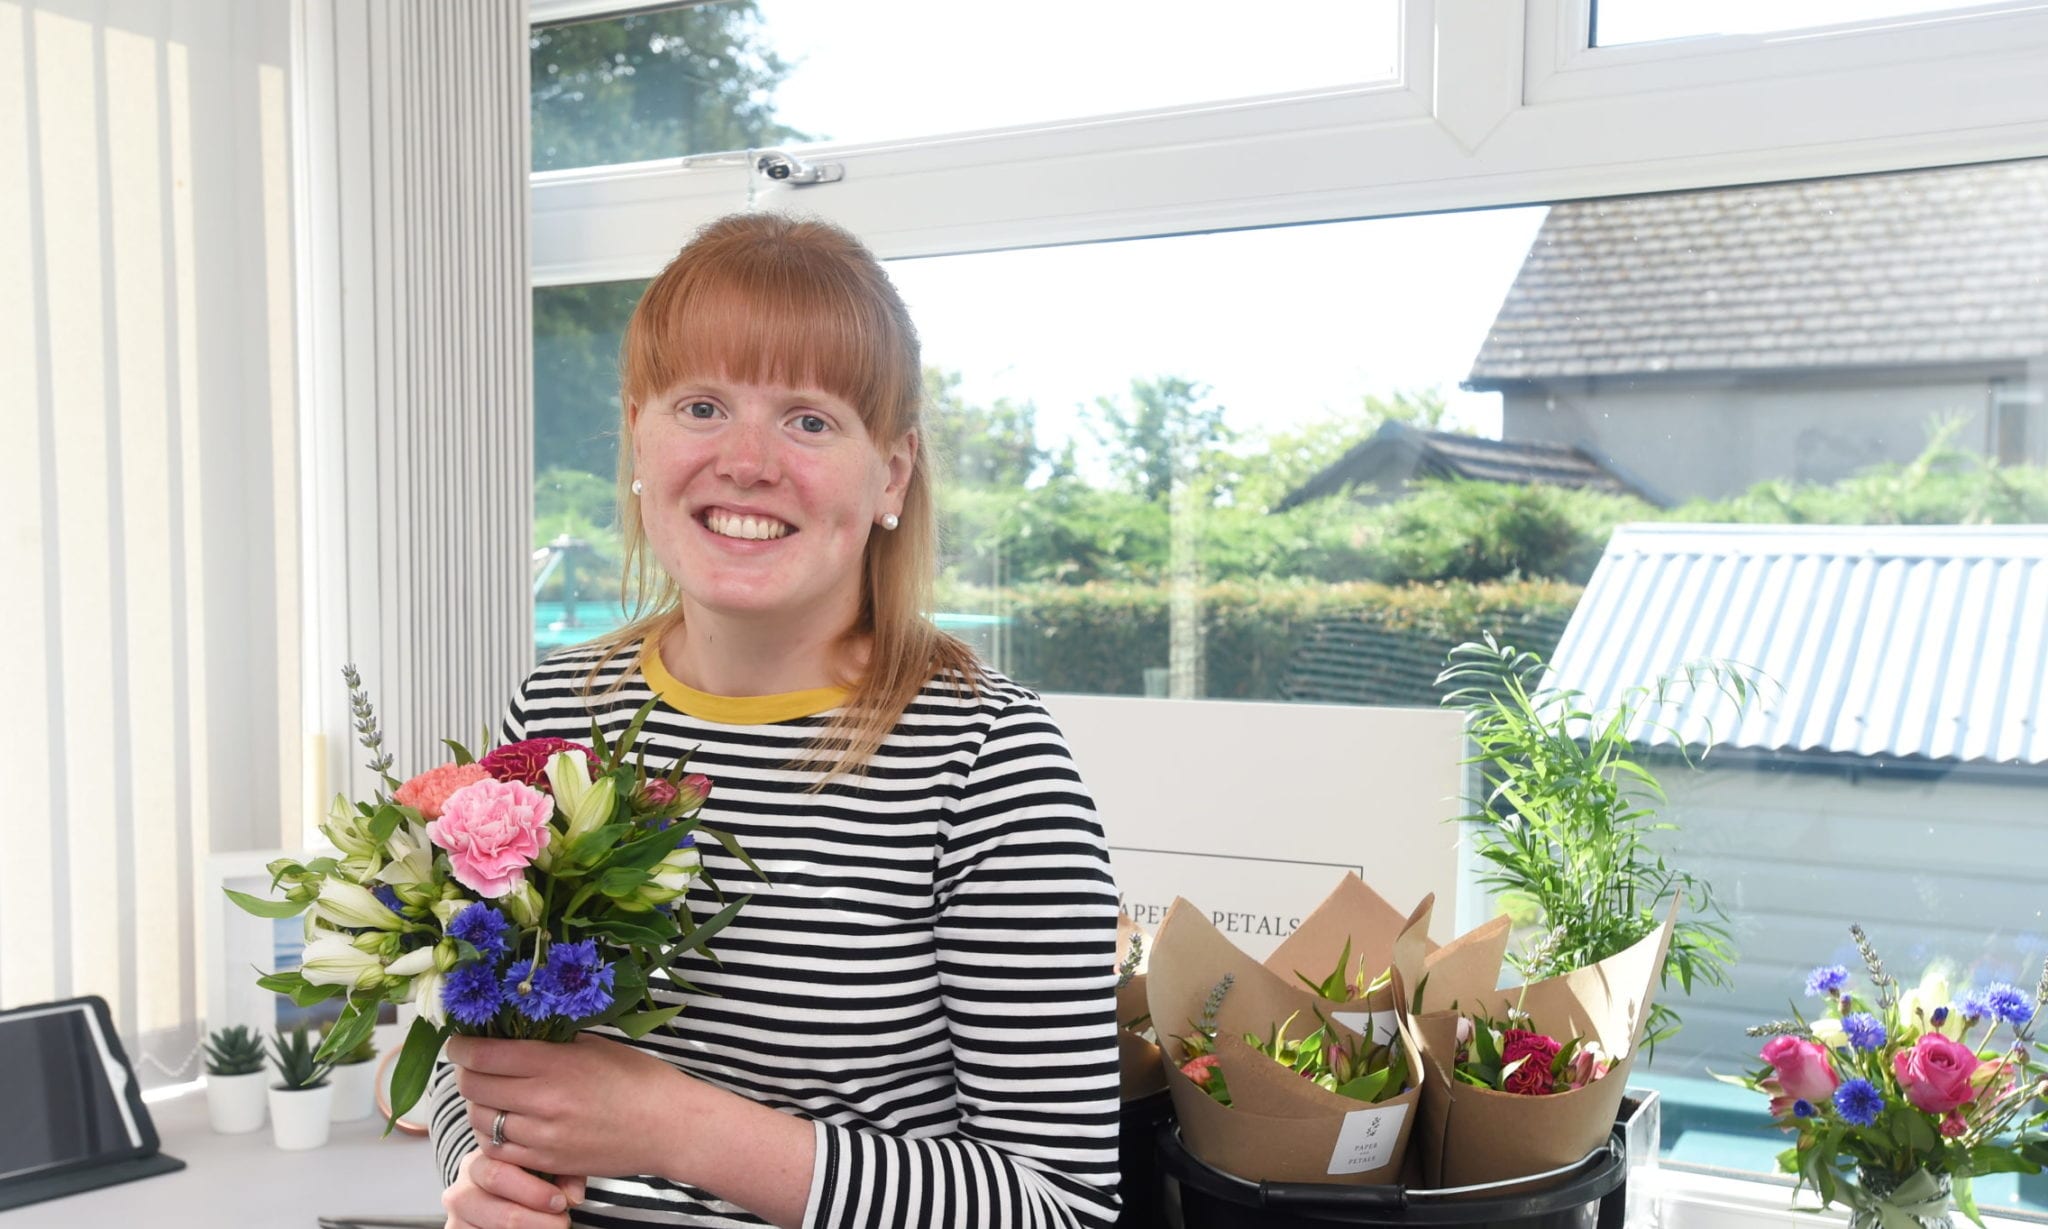 Aberdeenshire florist continues to blossom during lockdown after taking innovative approach